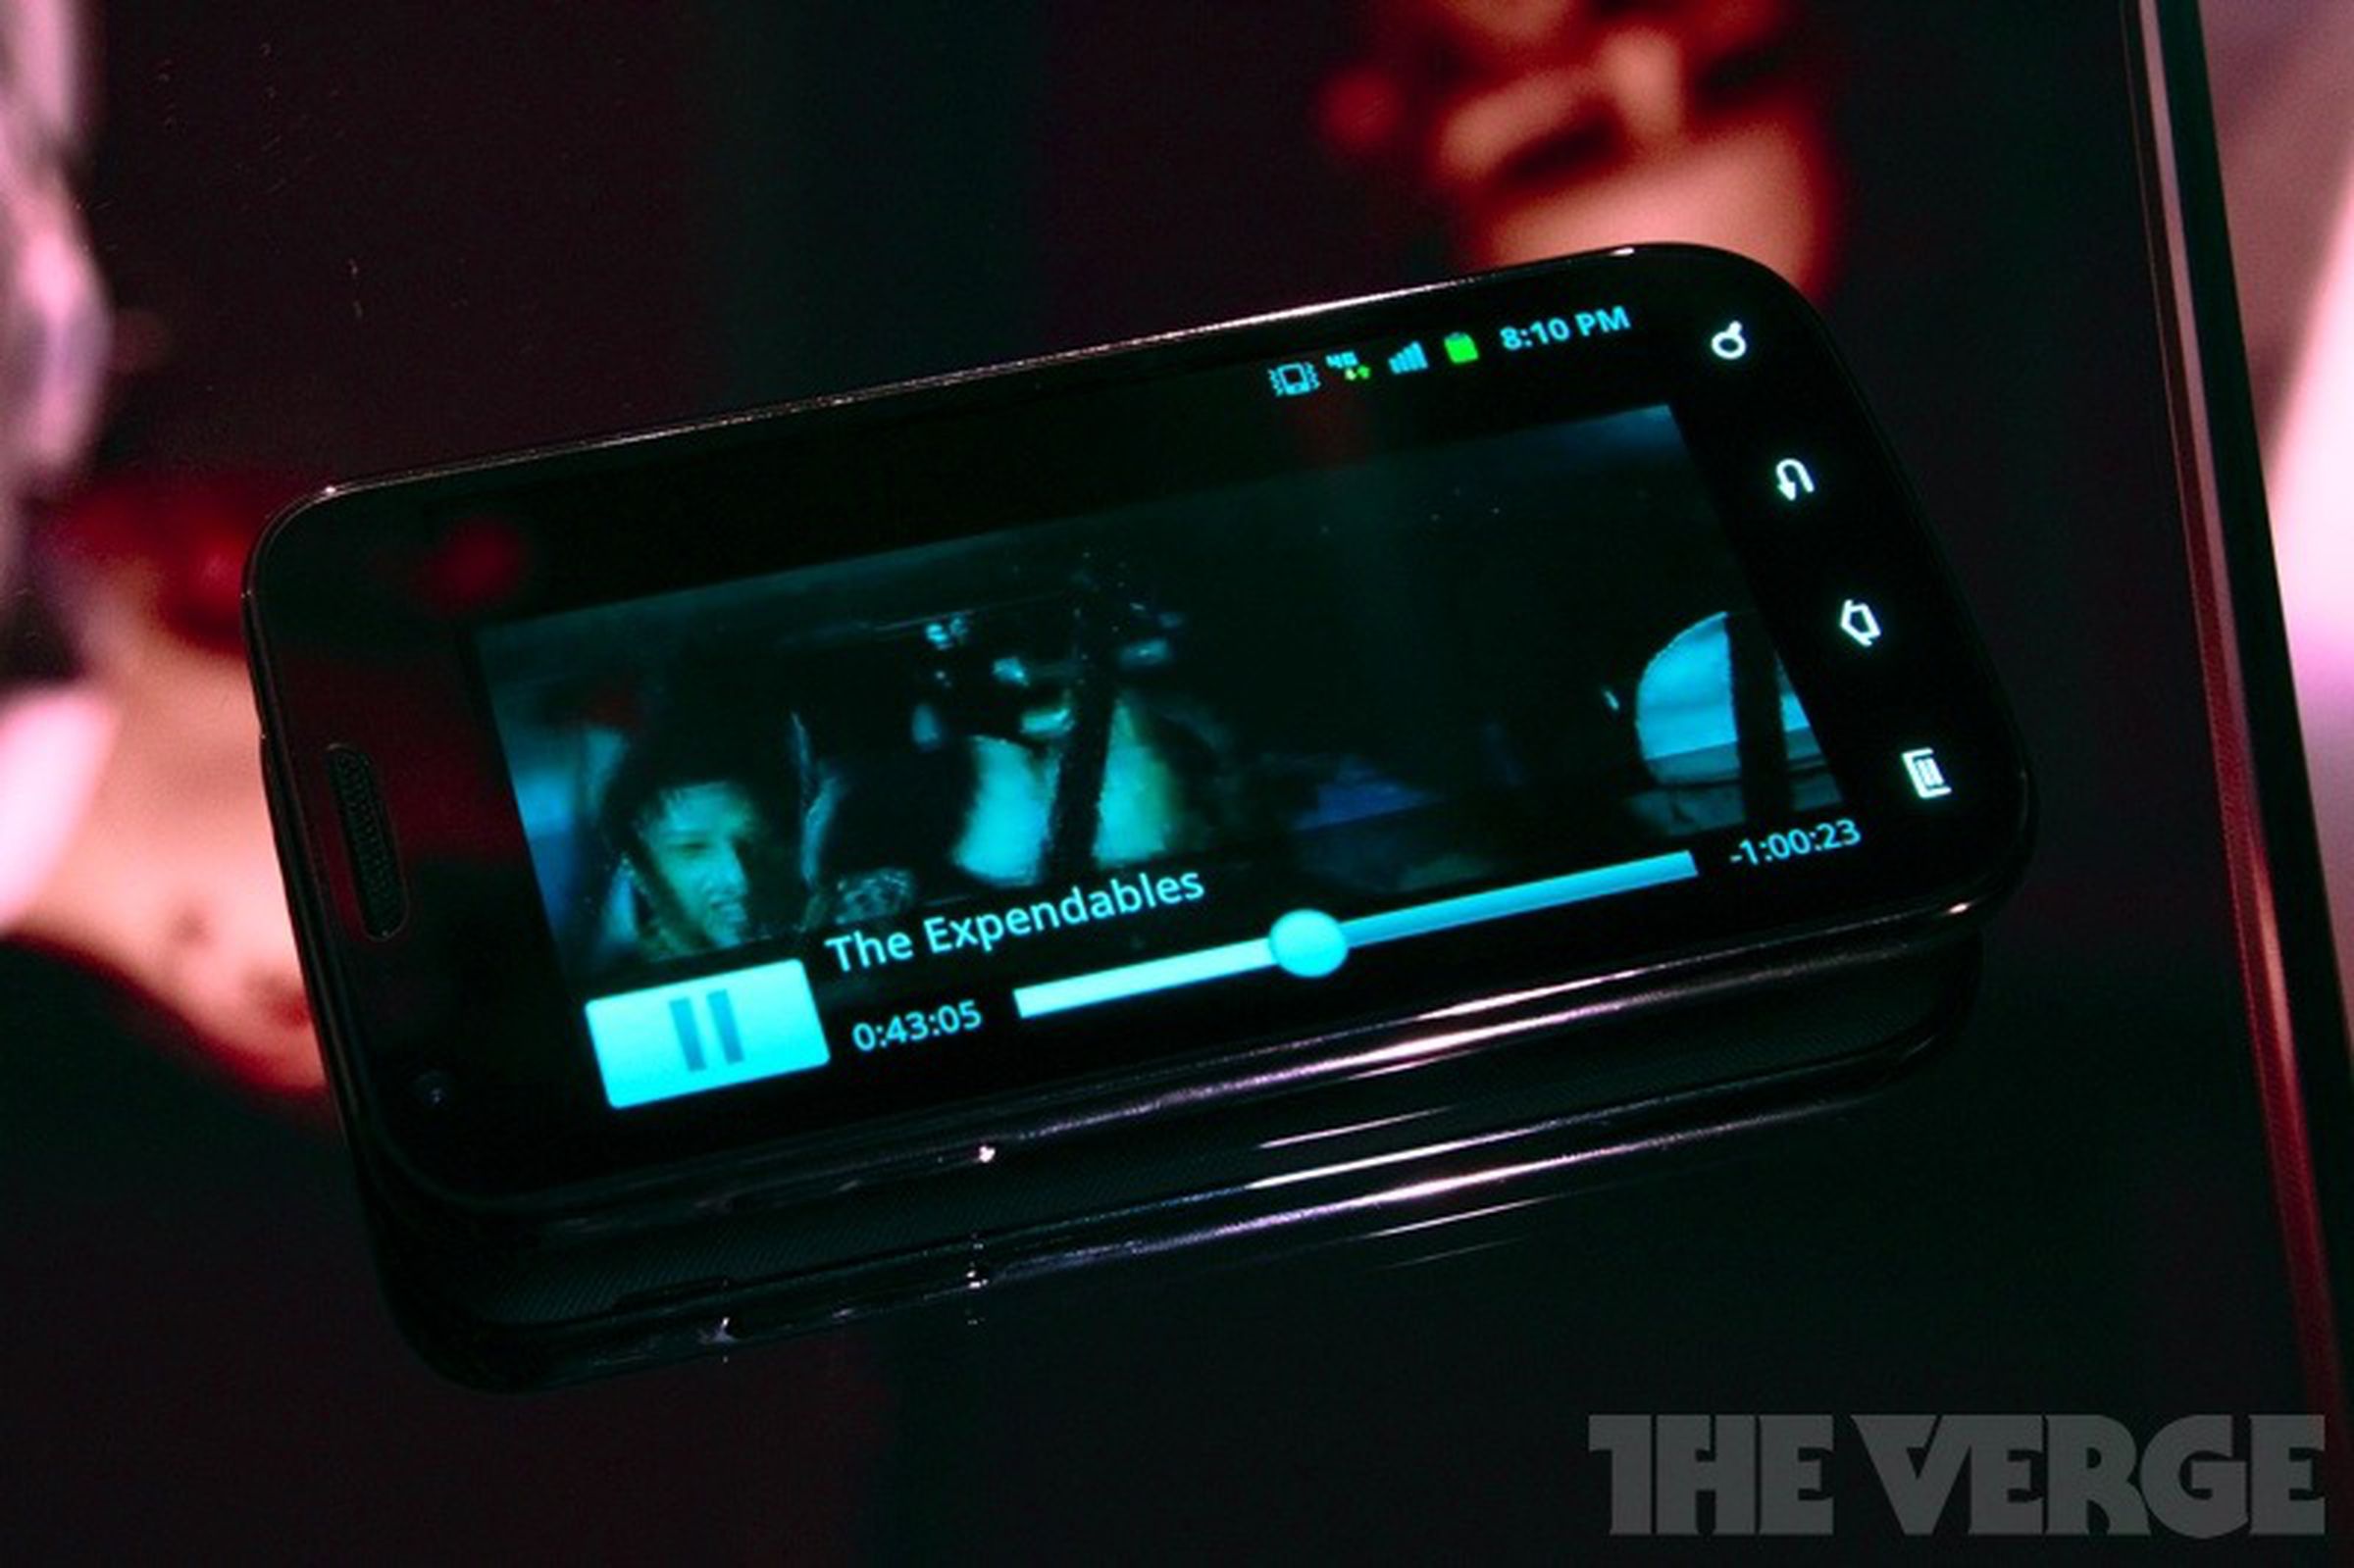 HTC Amaze 4G and Galaxy S II for T-Mobile hands-on photos